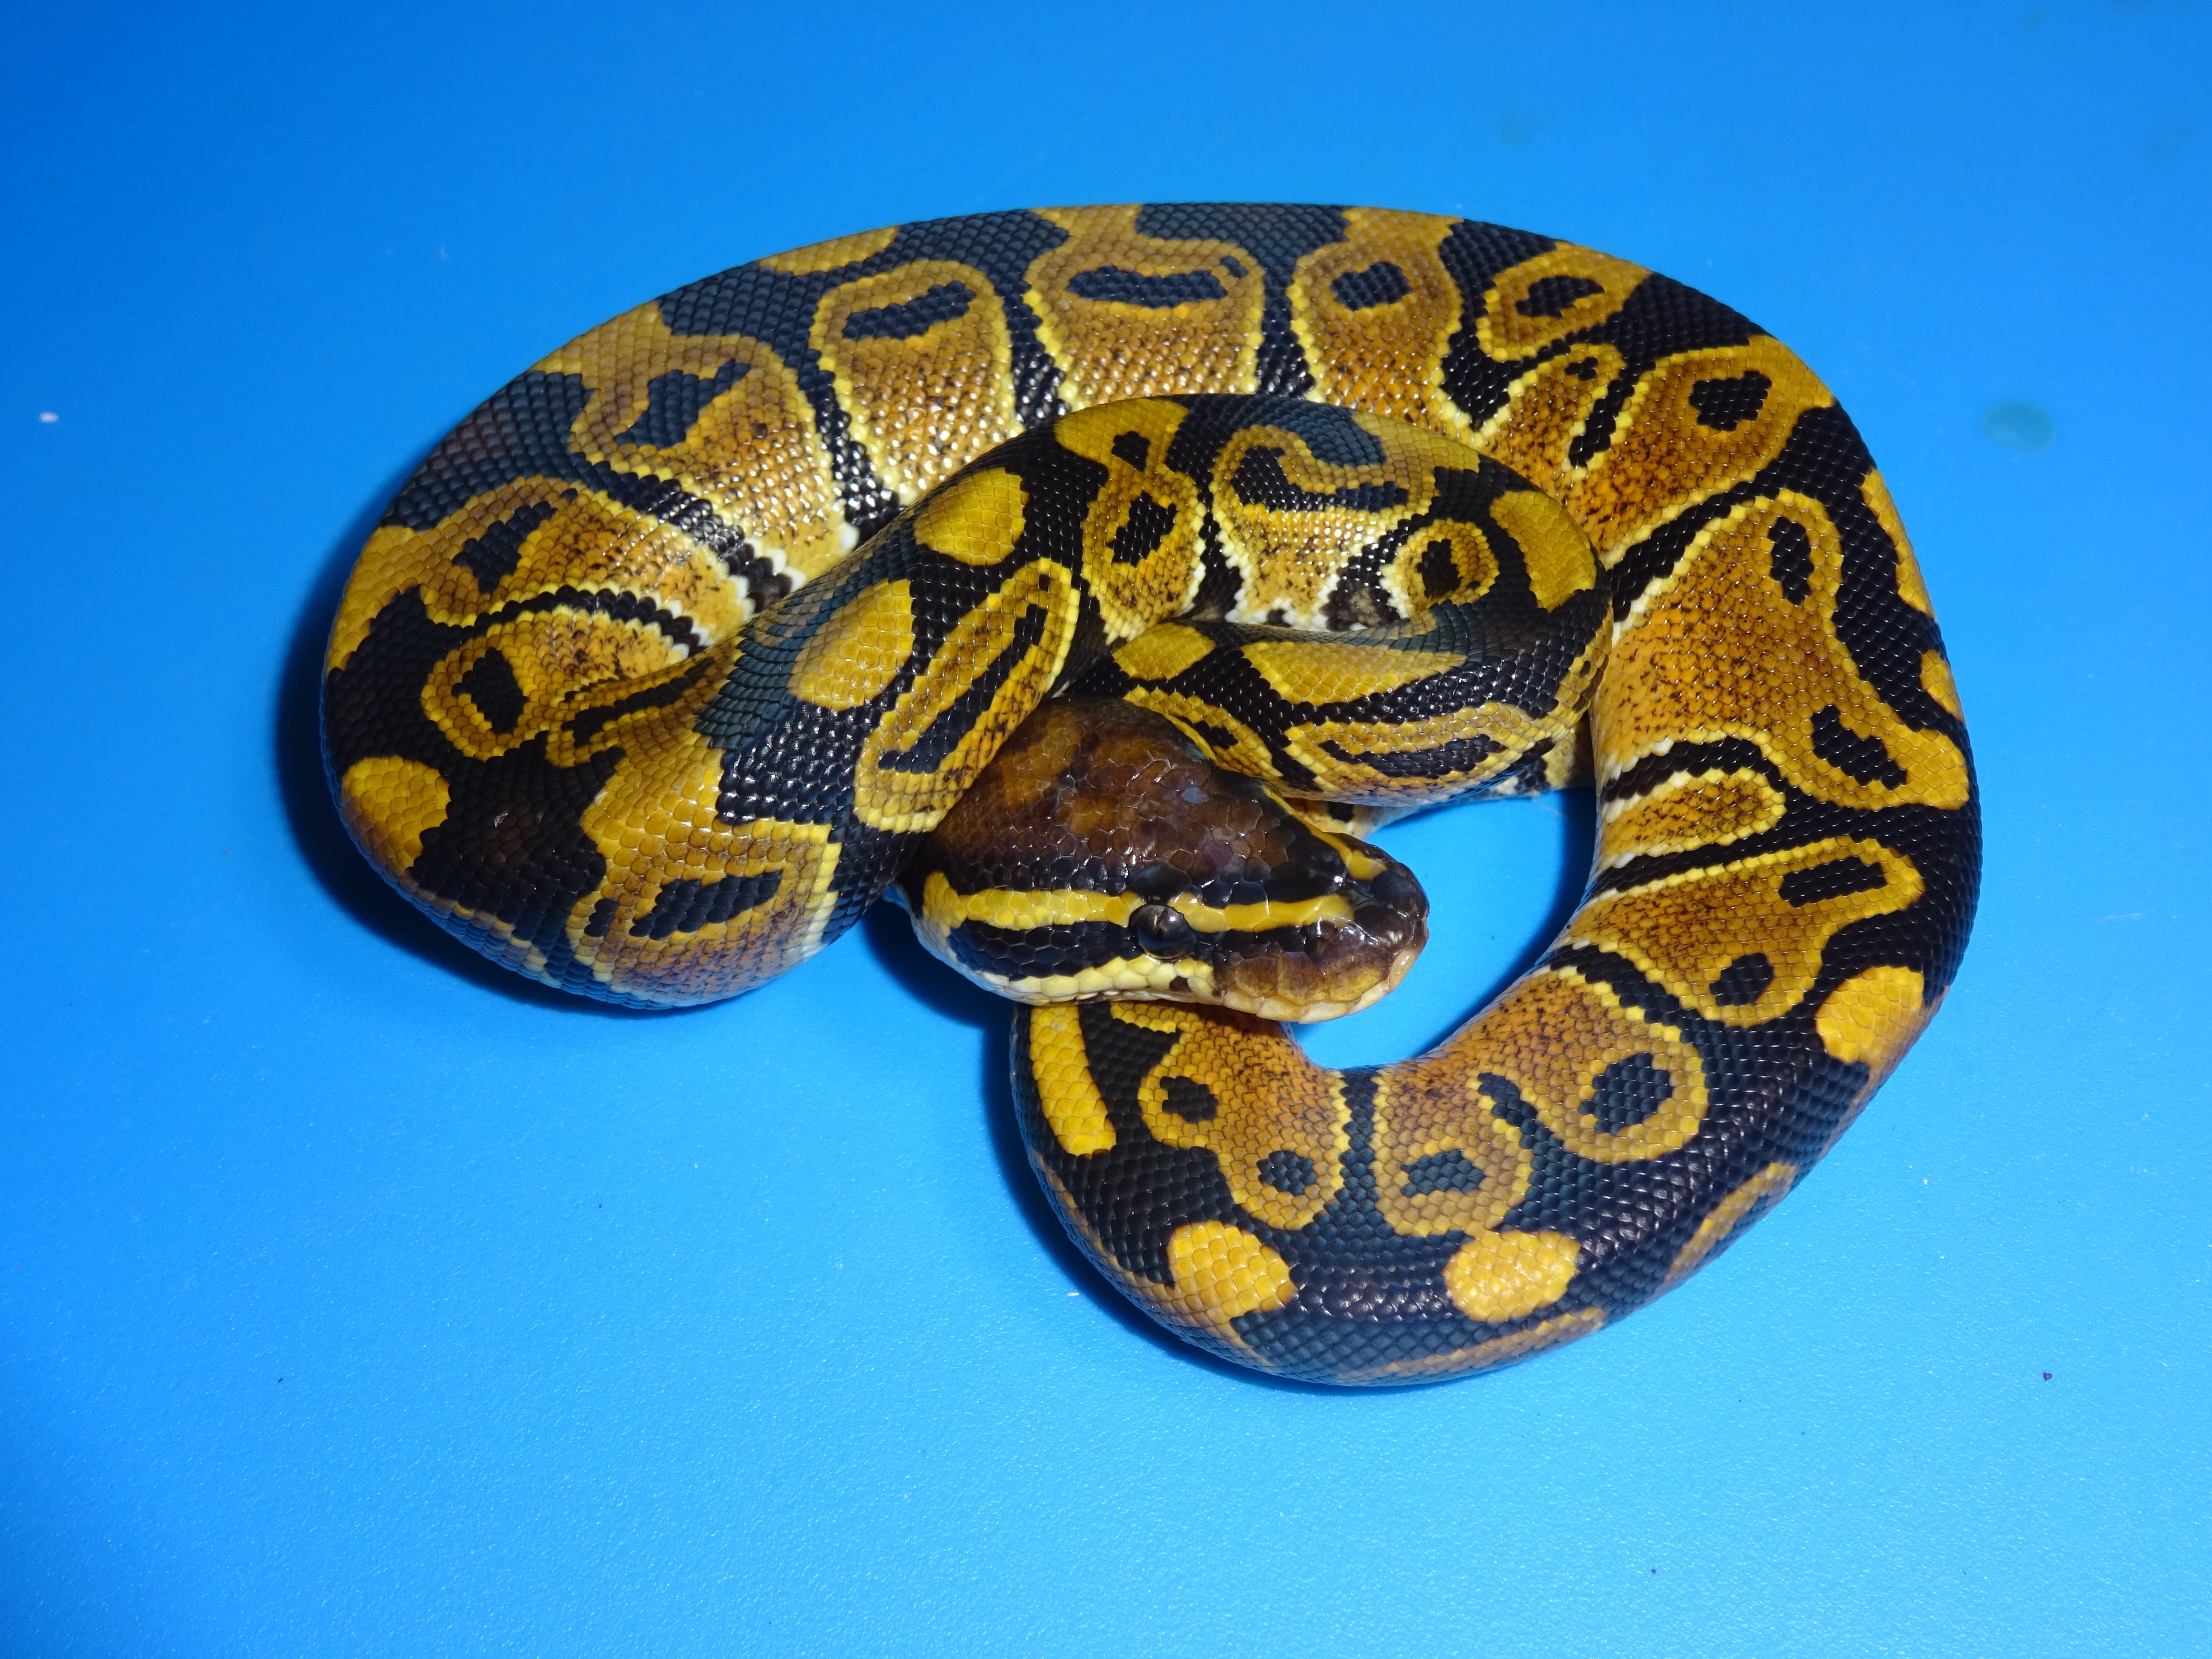 Epic Ball Python by Strictly Reptiles, Inc.